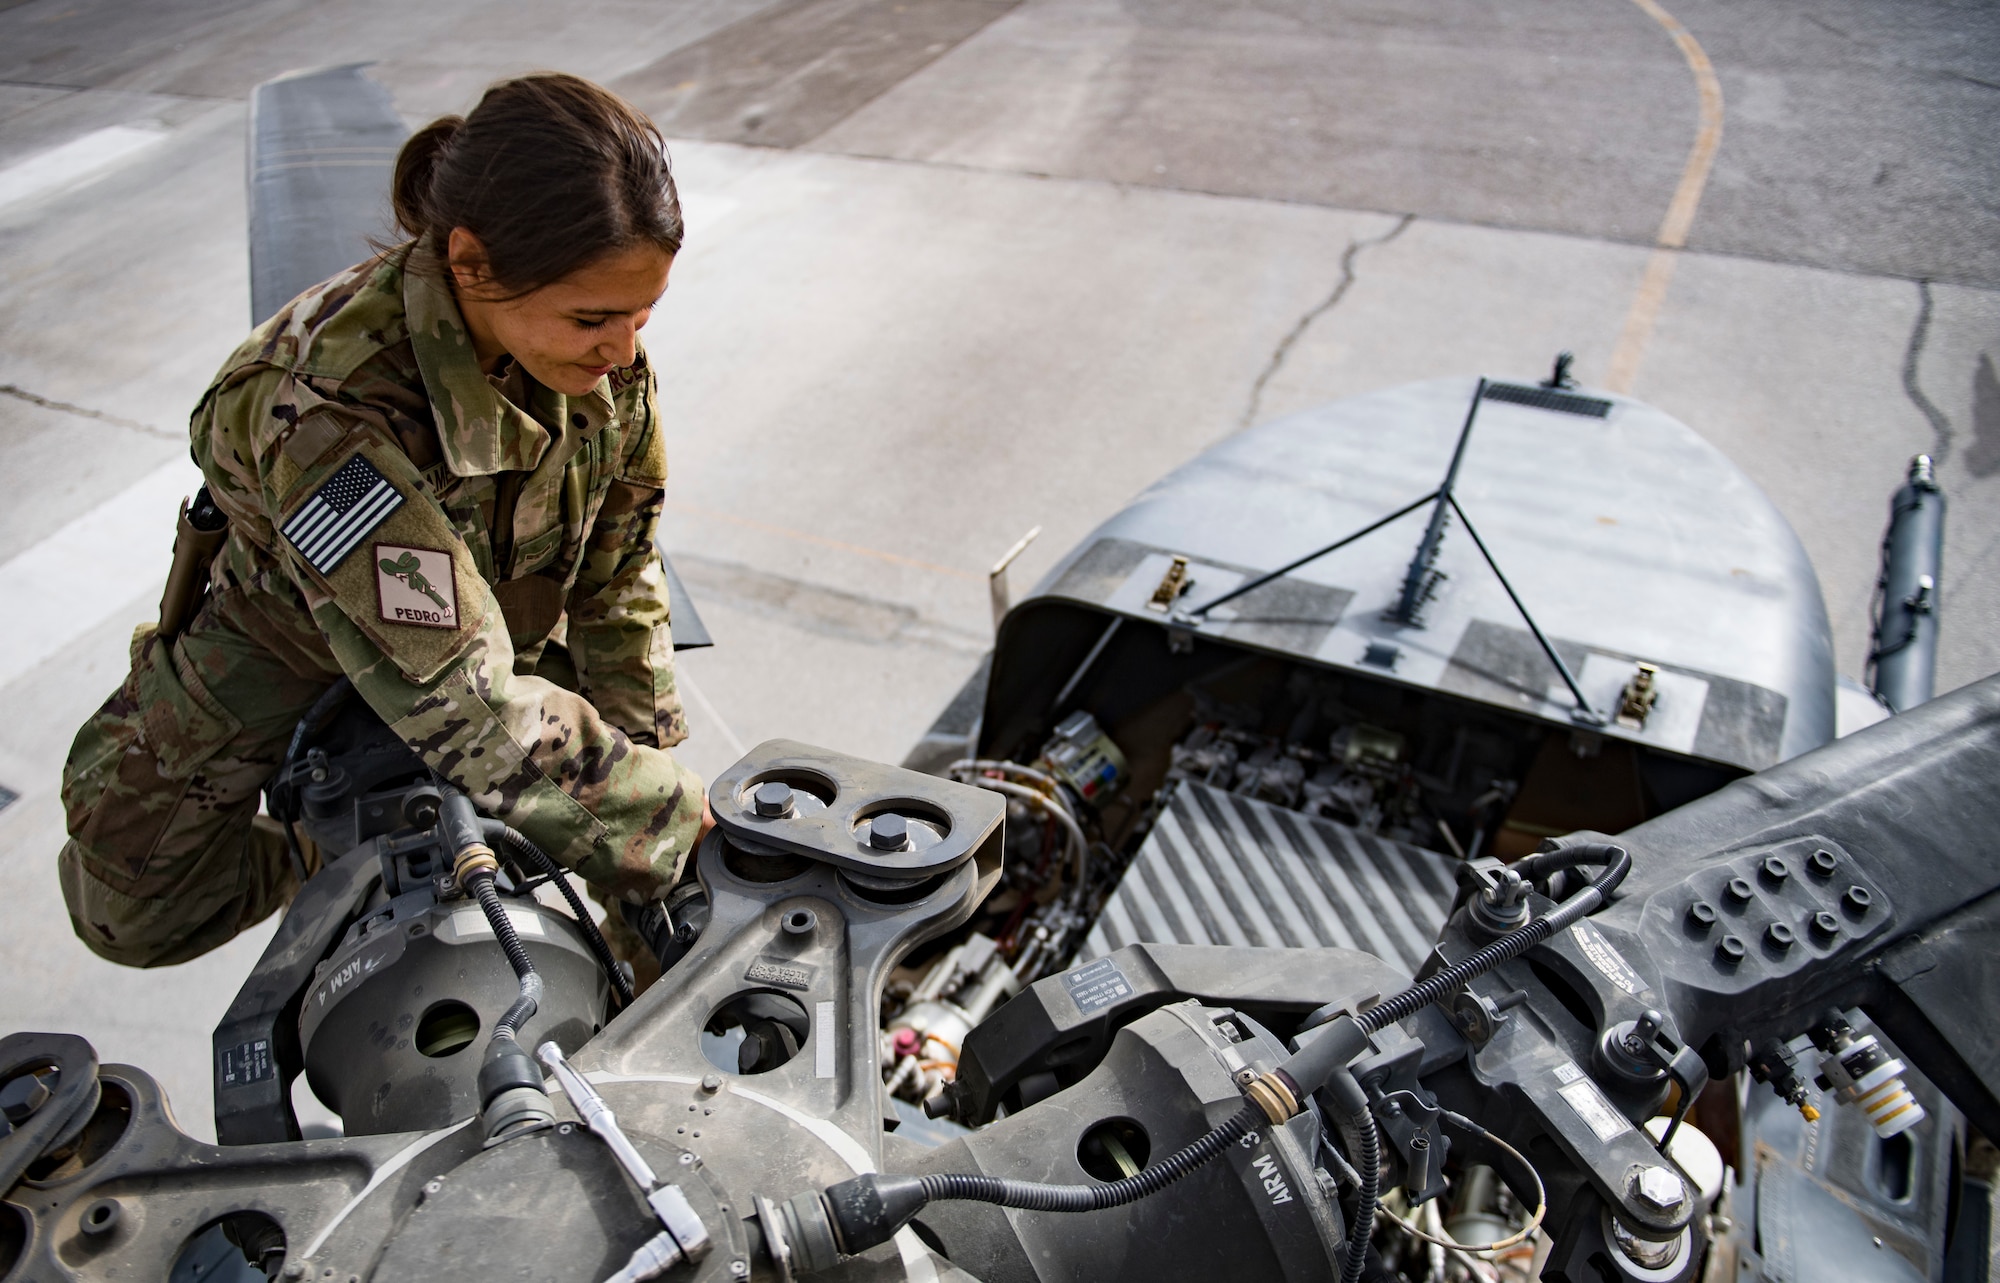 U.S. Air Force Airman 1st Class Ashley Amezola, HH-60G Pave Hawk crew chief assigned to the 451st Expeditionary Aircraft Maintenance Squadron, conducts maintenance on one of the helicopters before a training mission, March 13, 2018 at Kandahar Airfield, Afghanistan.